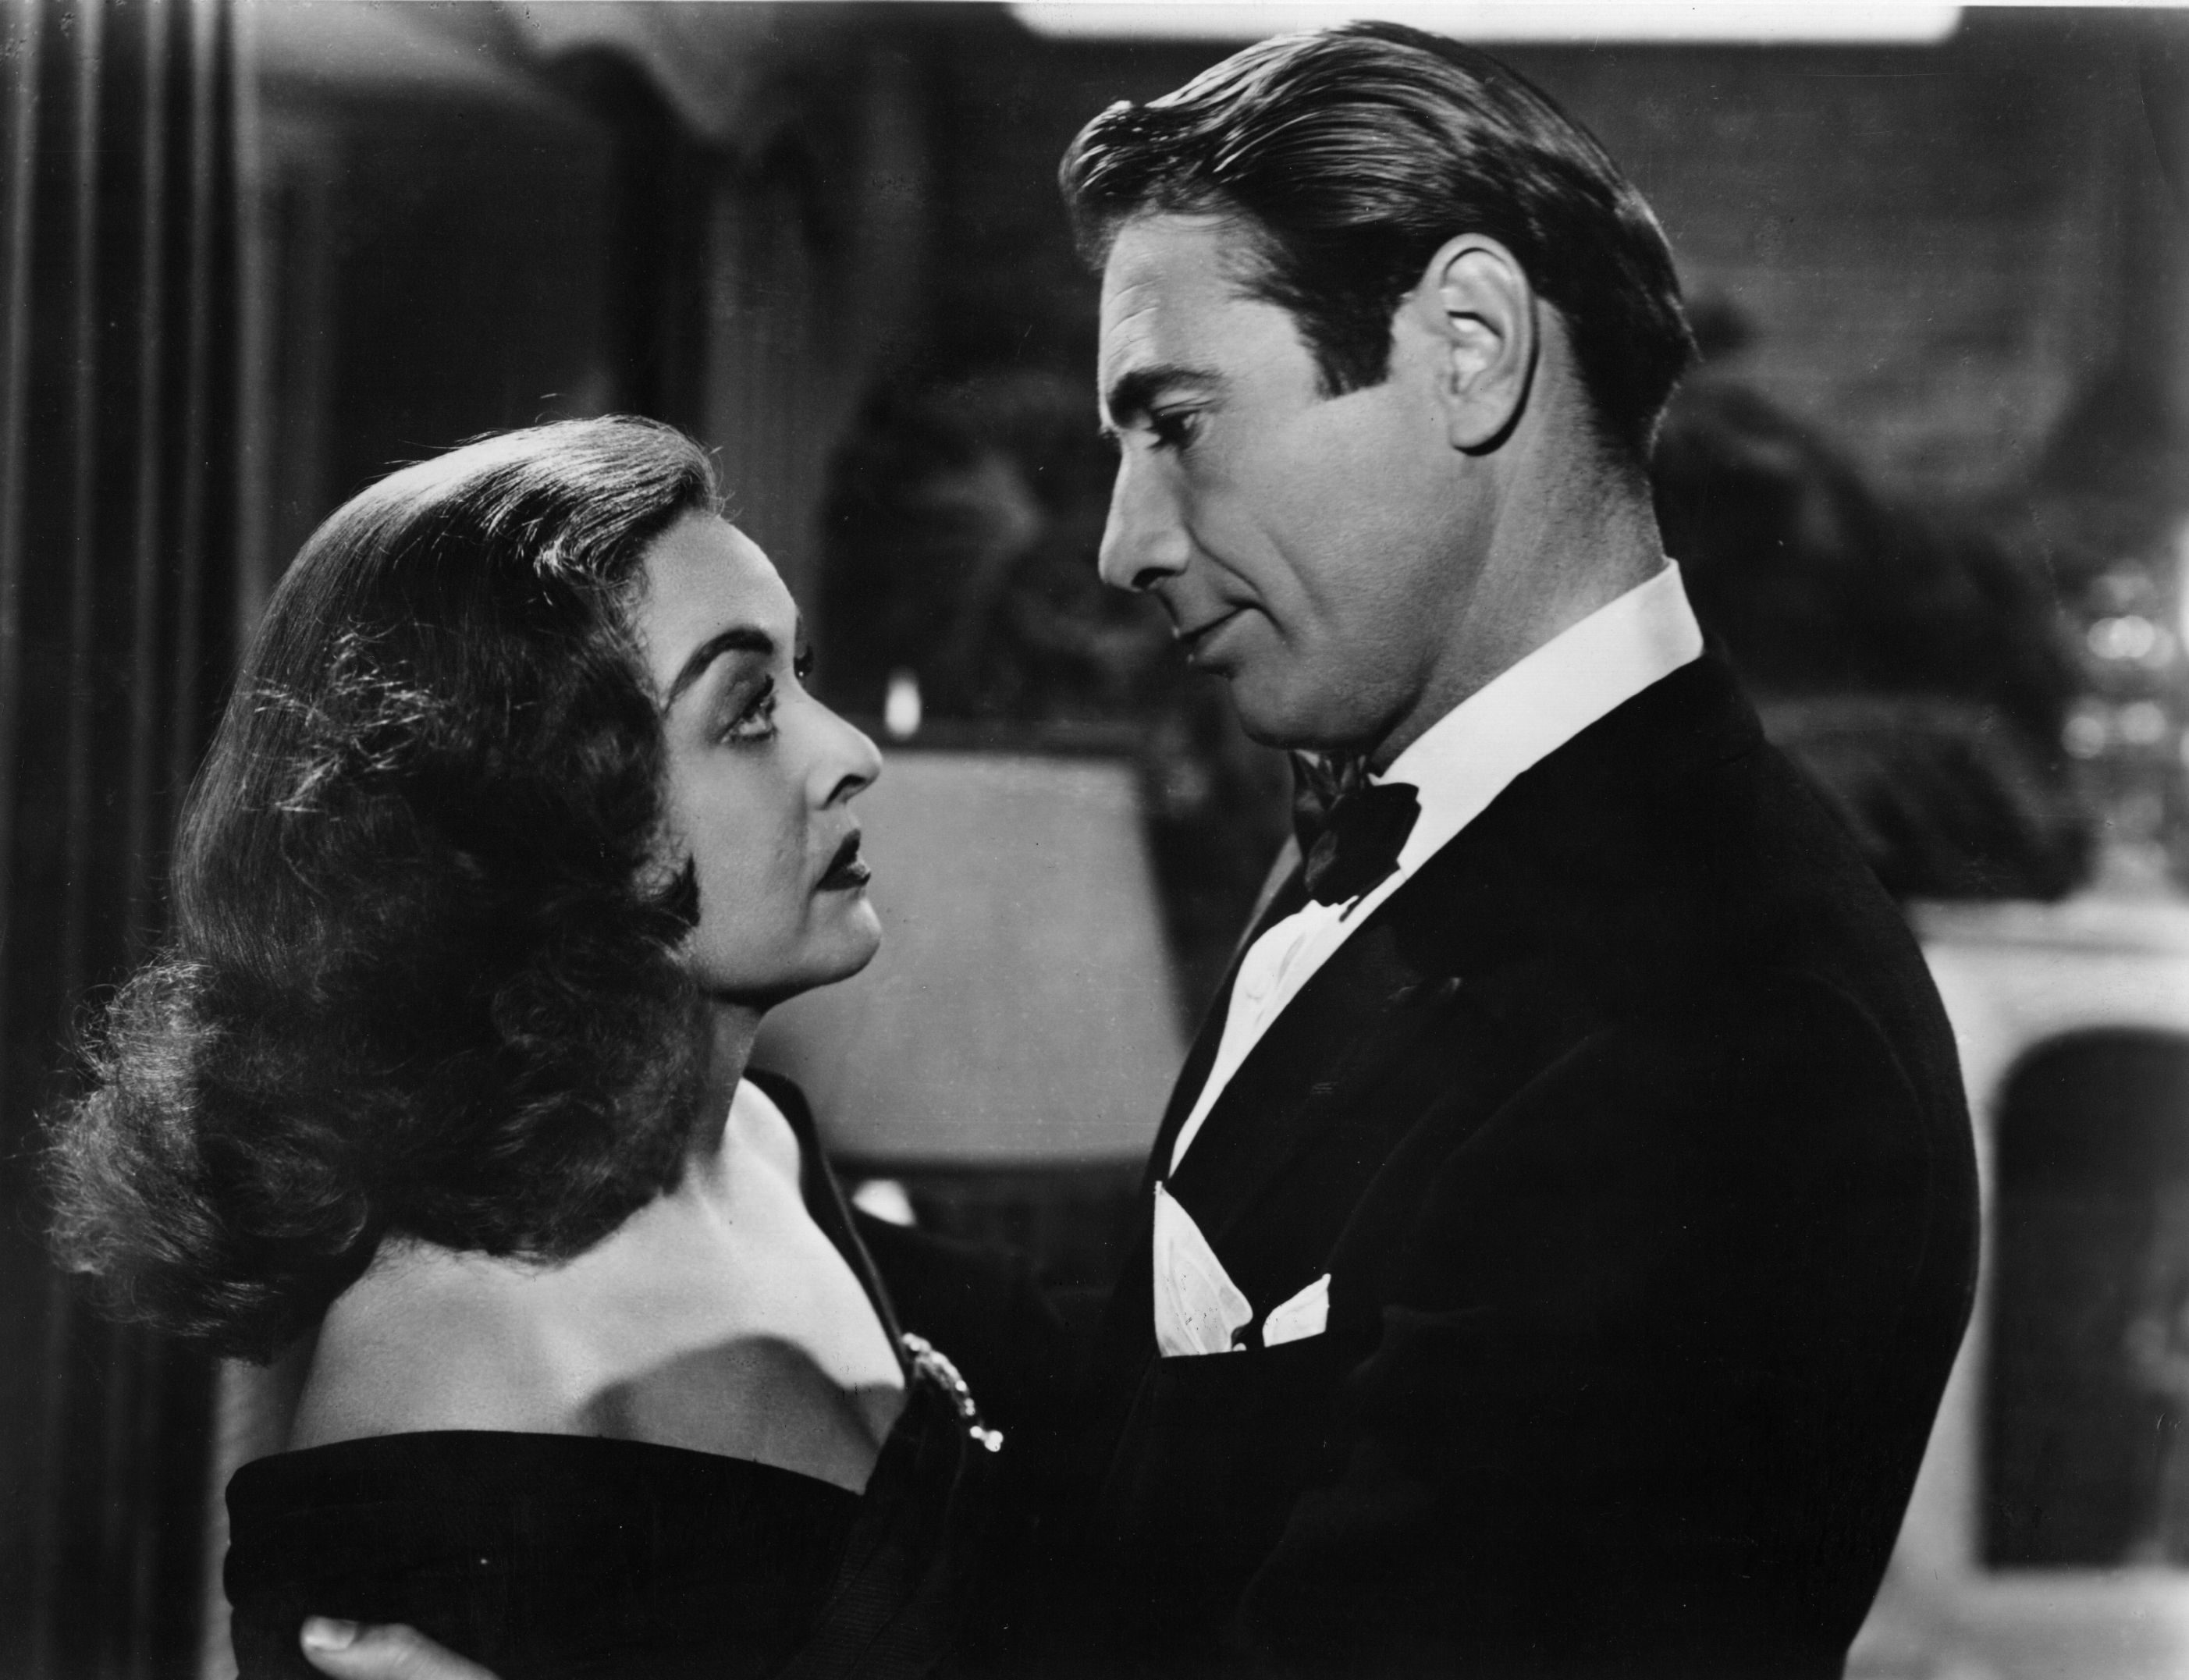 Bette Davis and former husband Gary Merrill embrace in a scene from 'All About Eve', 1950